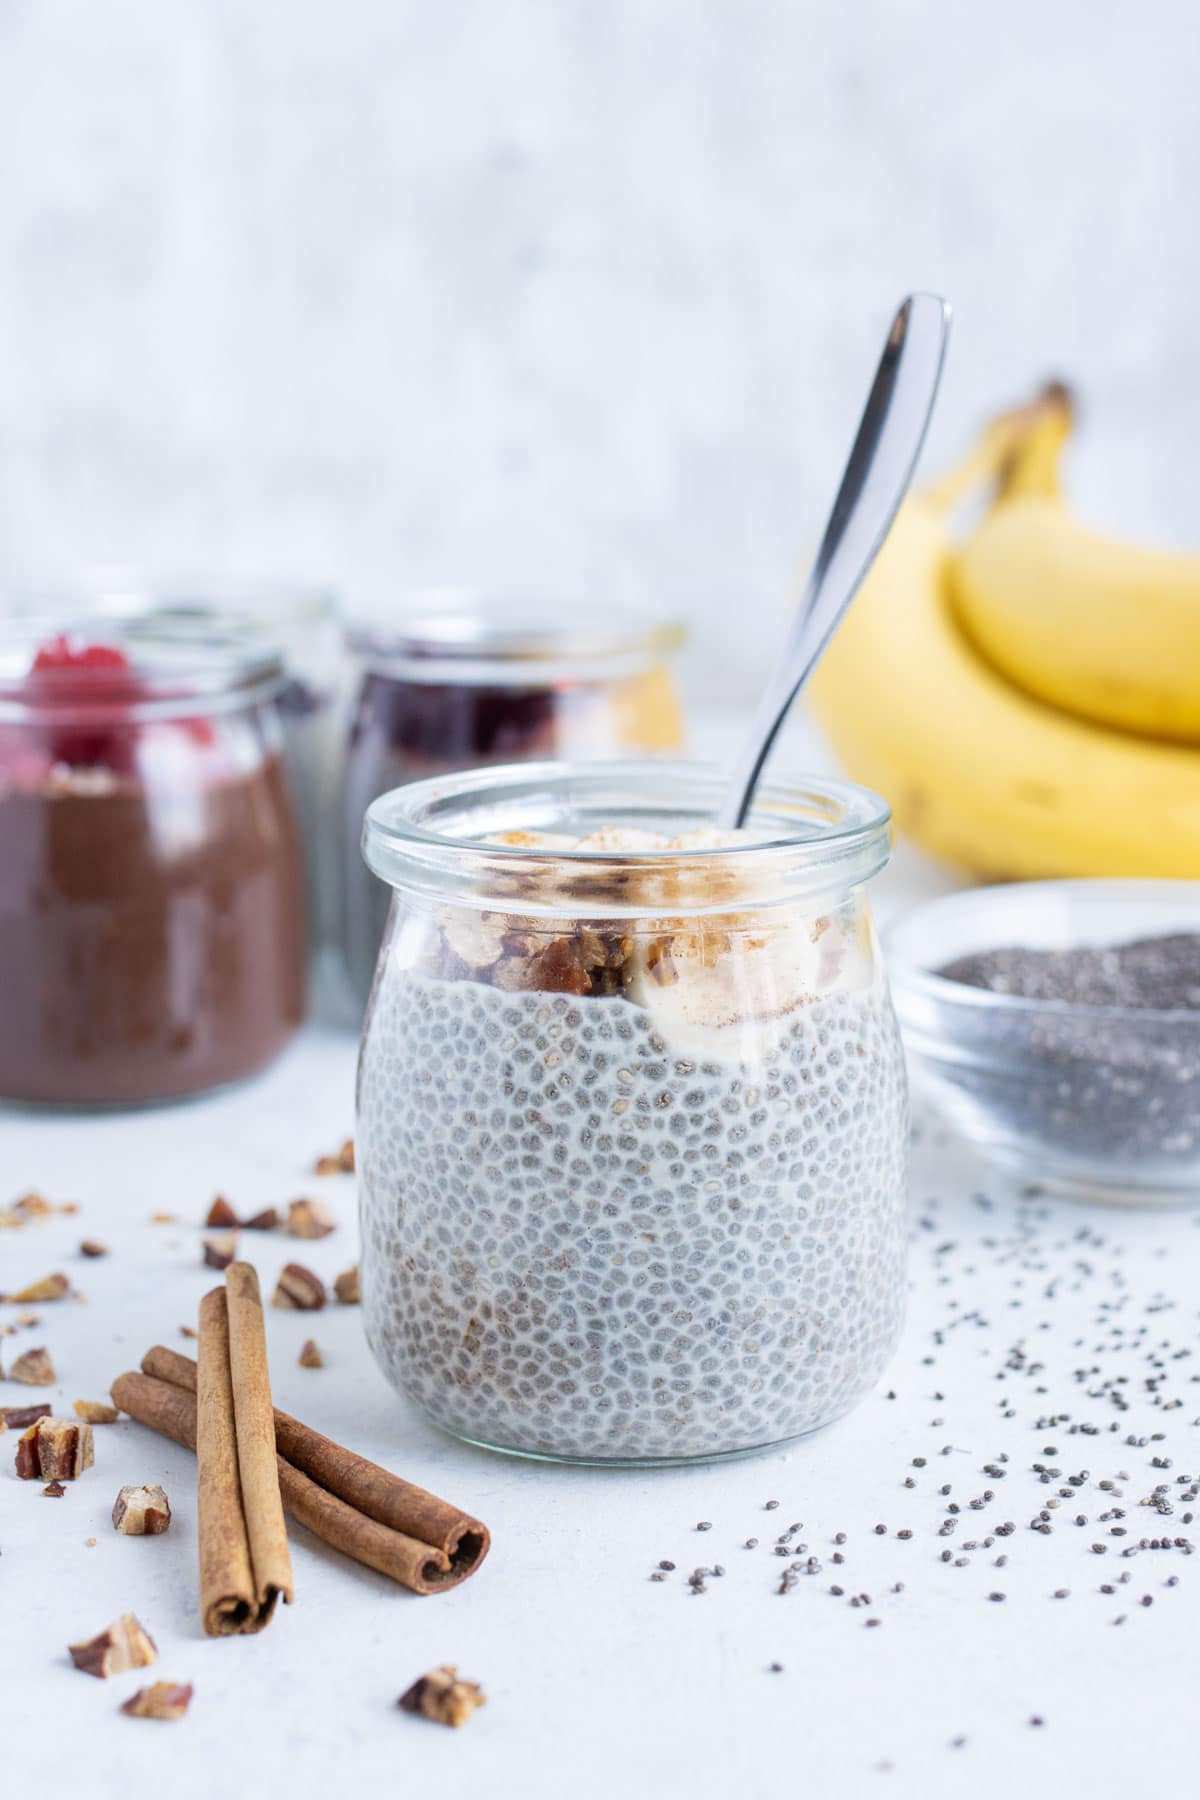 Banana nut chia seed pudding is shown on the counter.